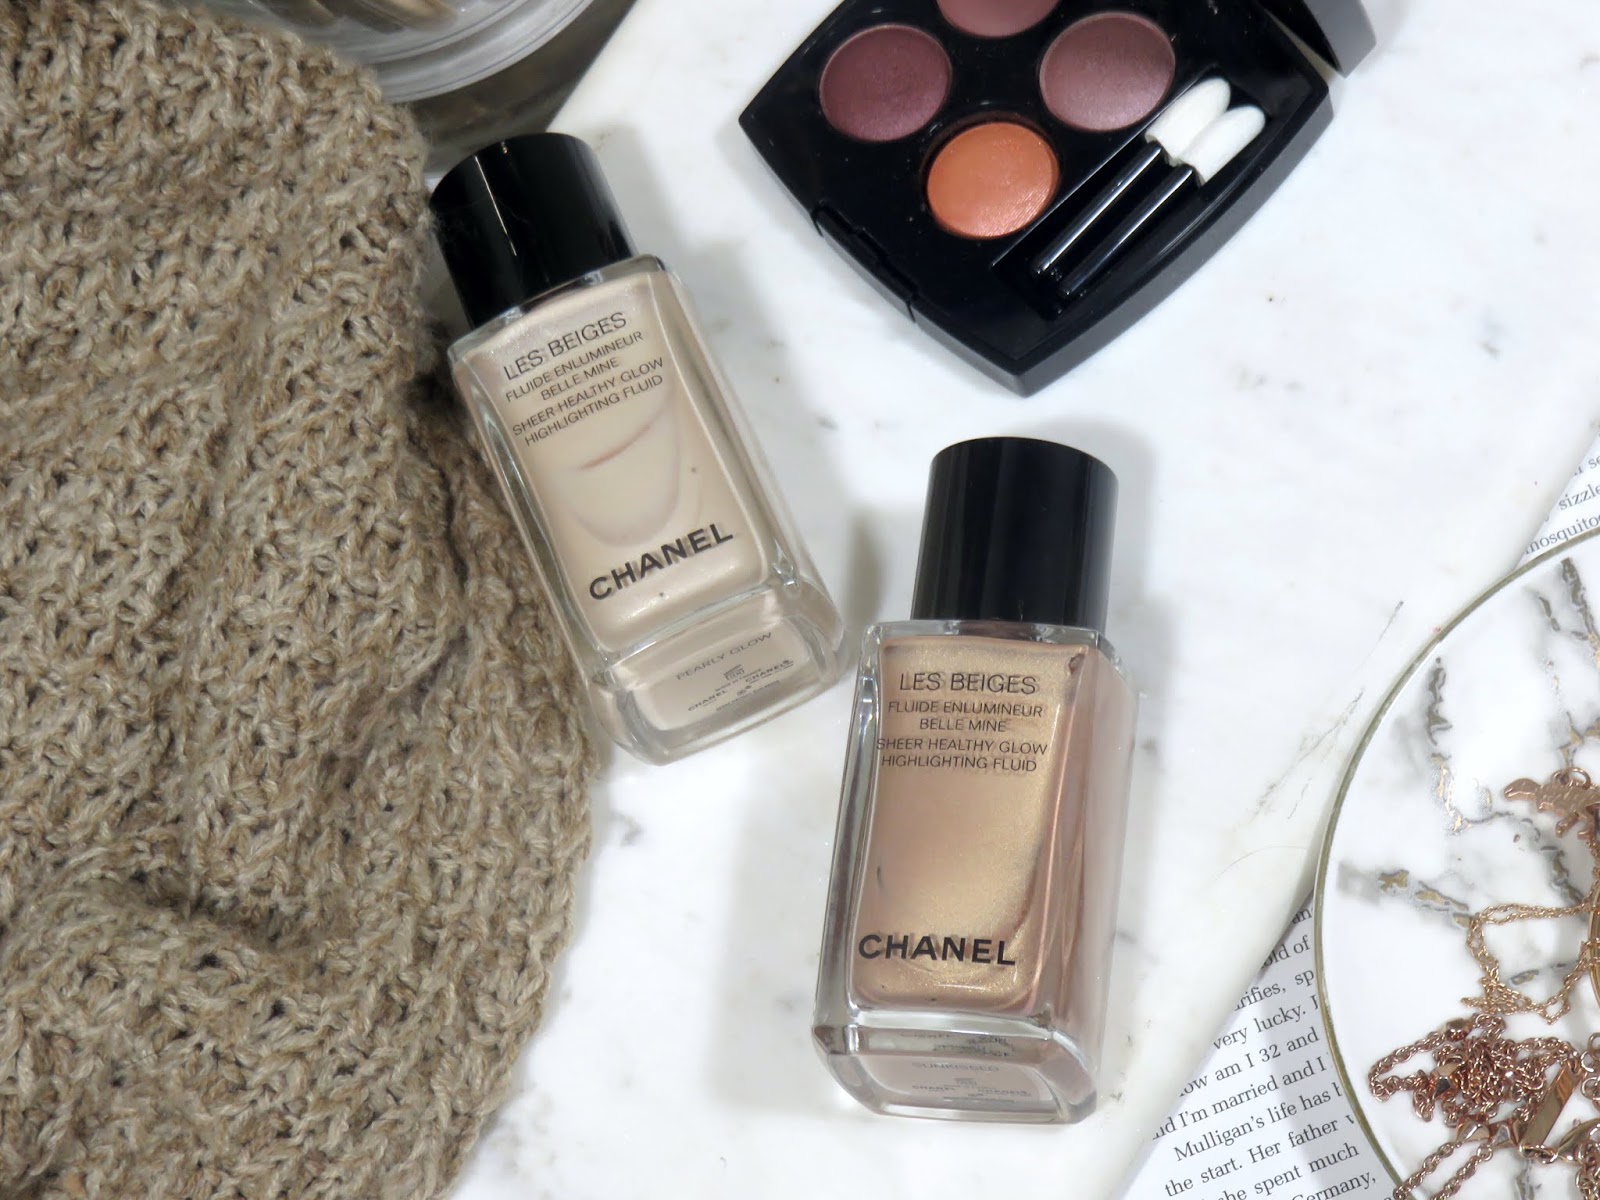 Chanel LES BEIGES Sheer Healthy Glow Highlighting Fluid